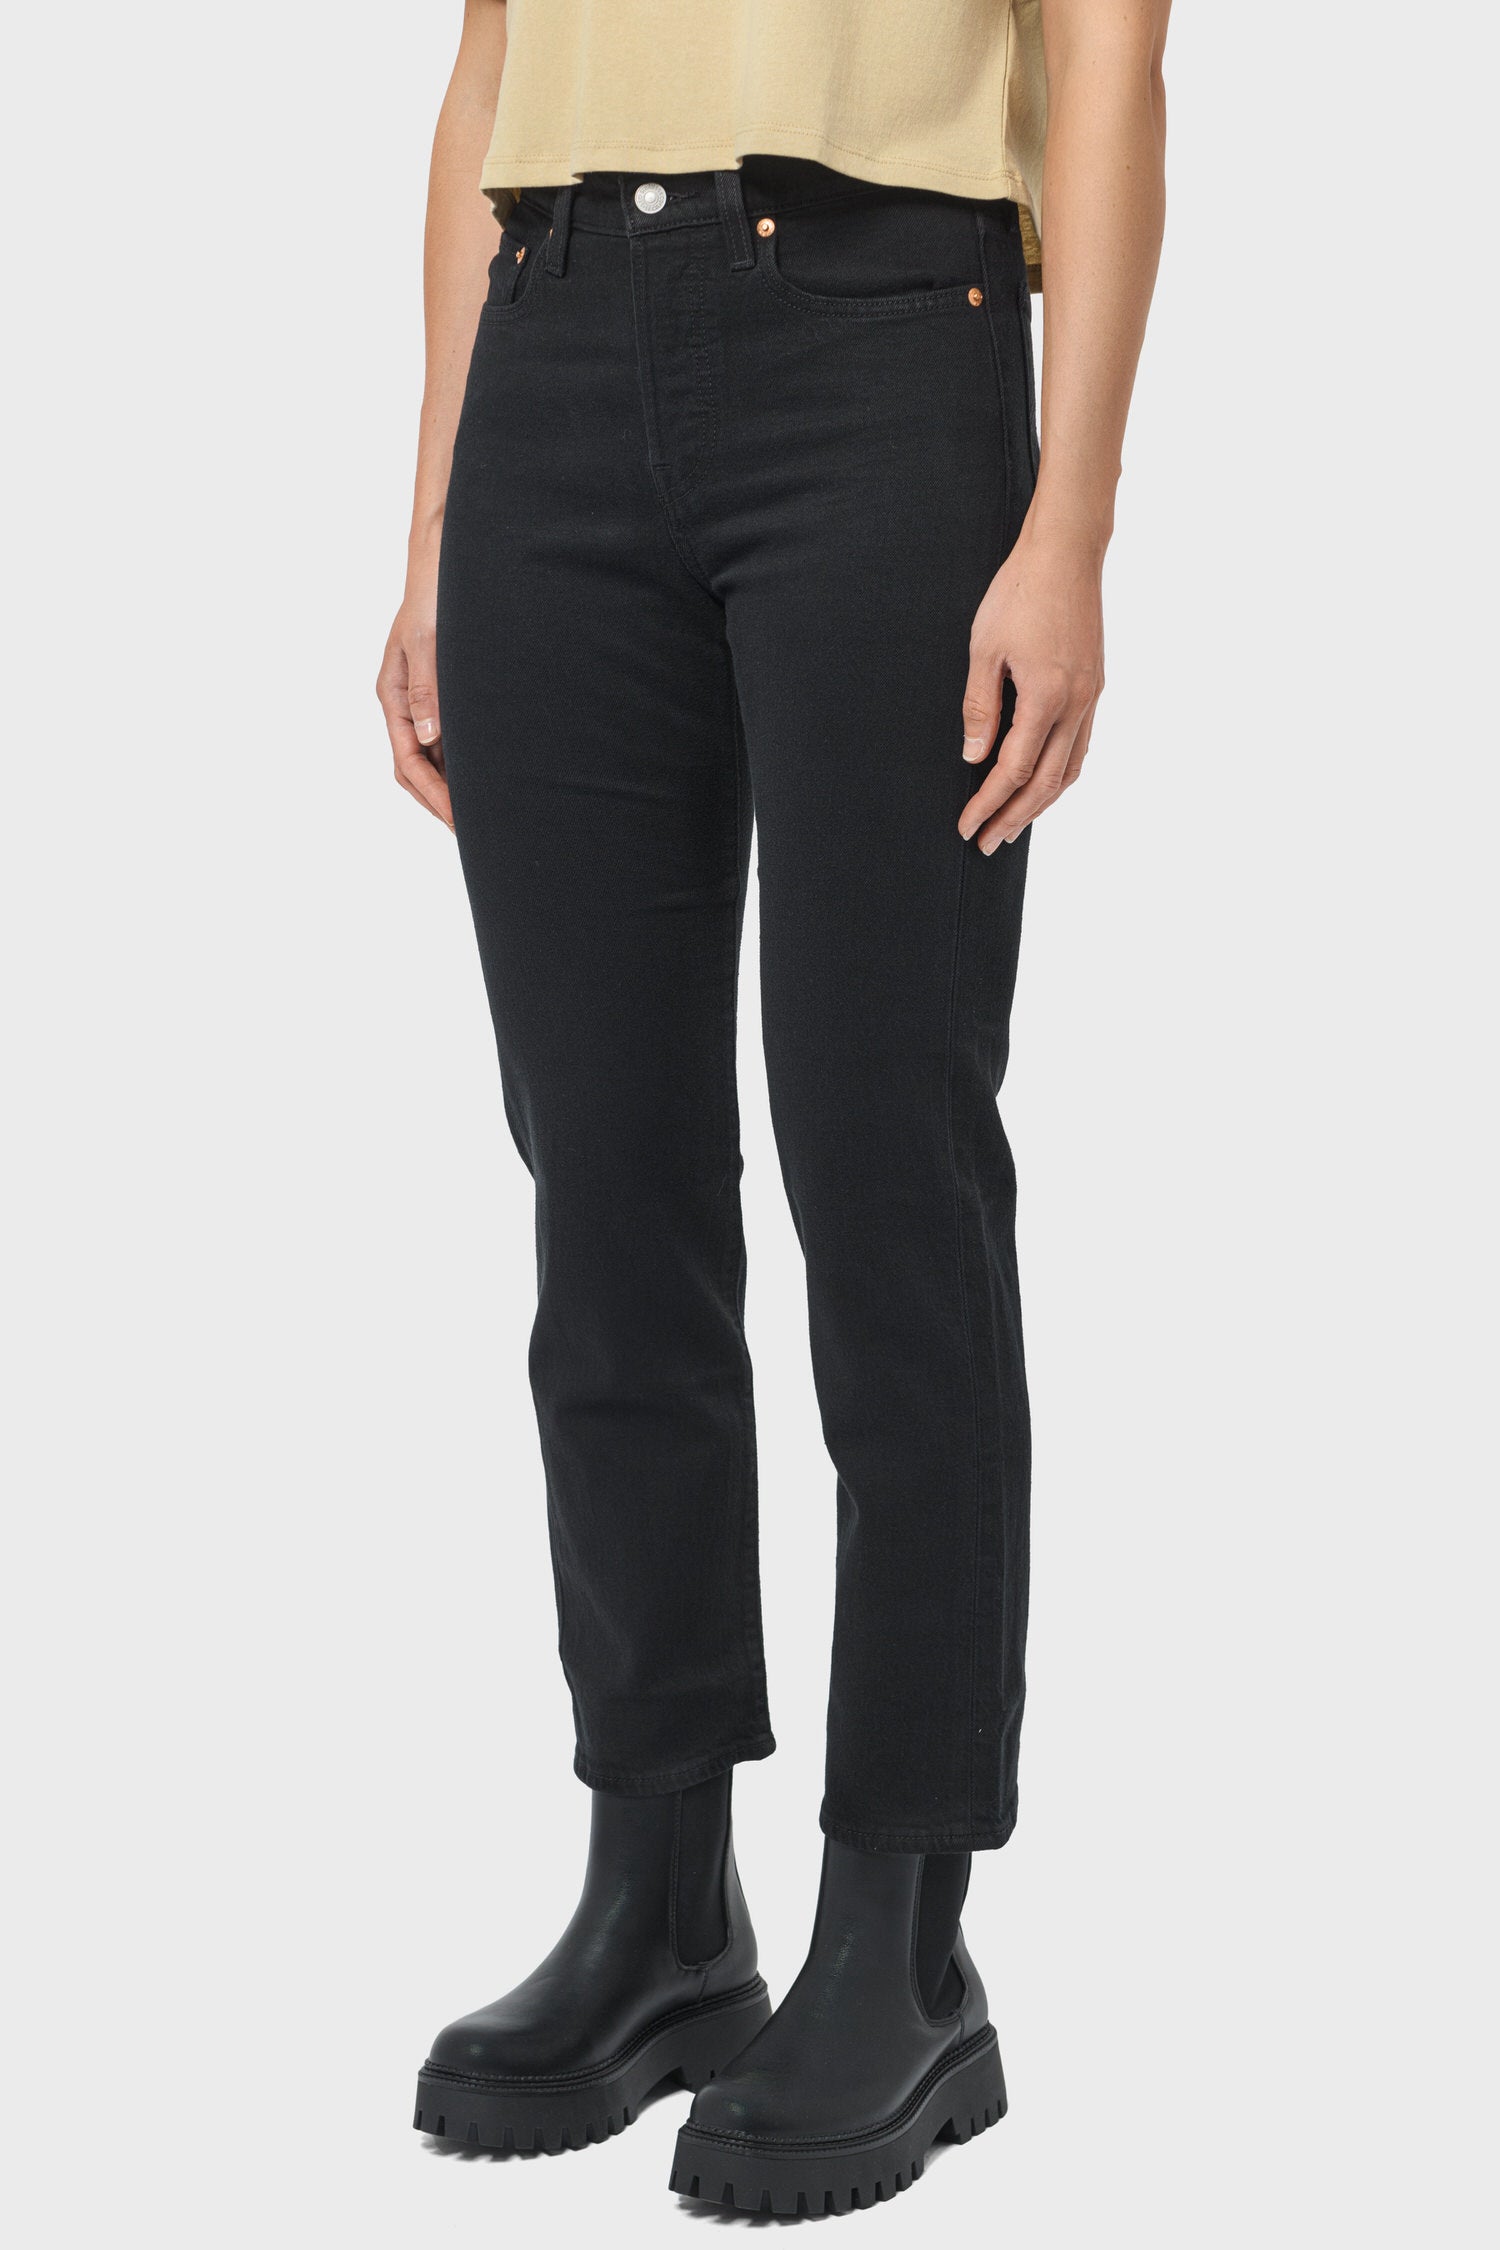 Women's Levi's Wedgie Straight Fit in Black Sprout